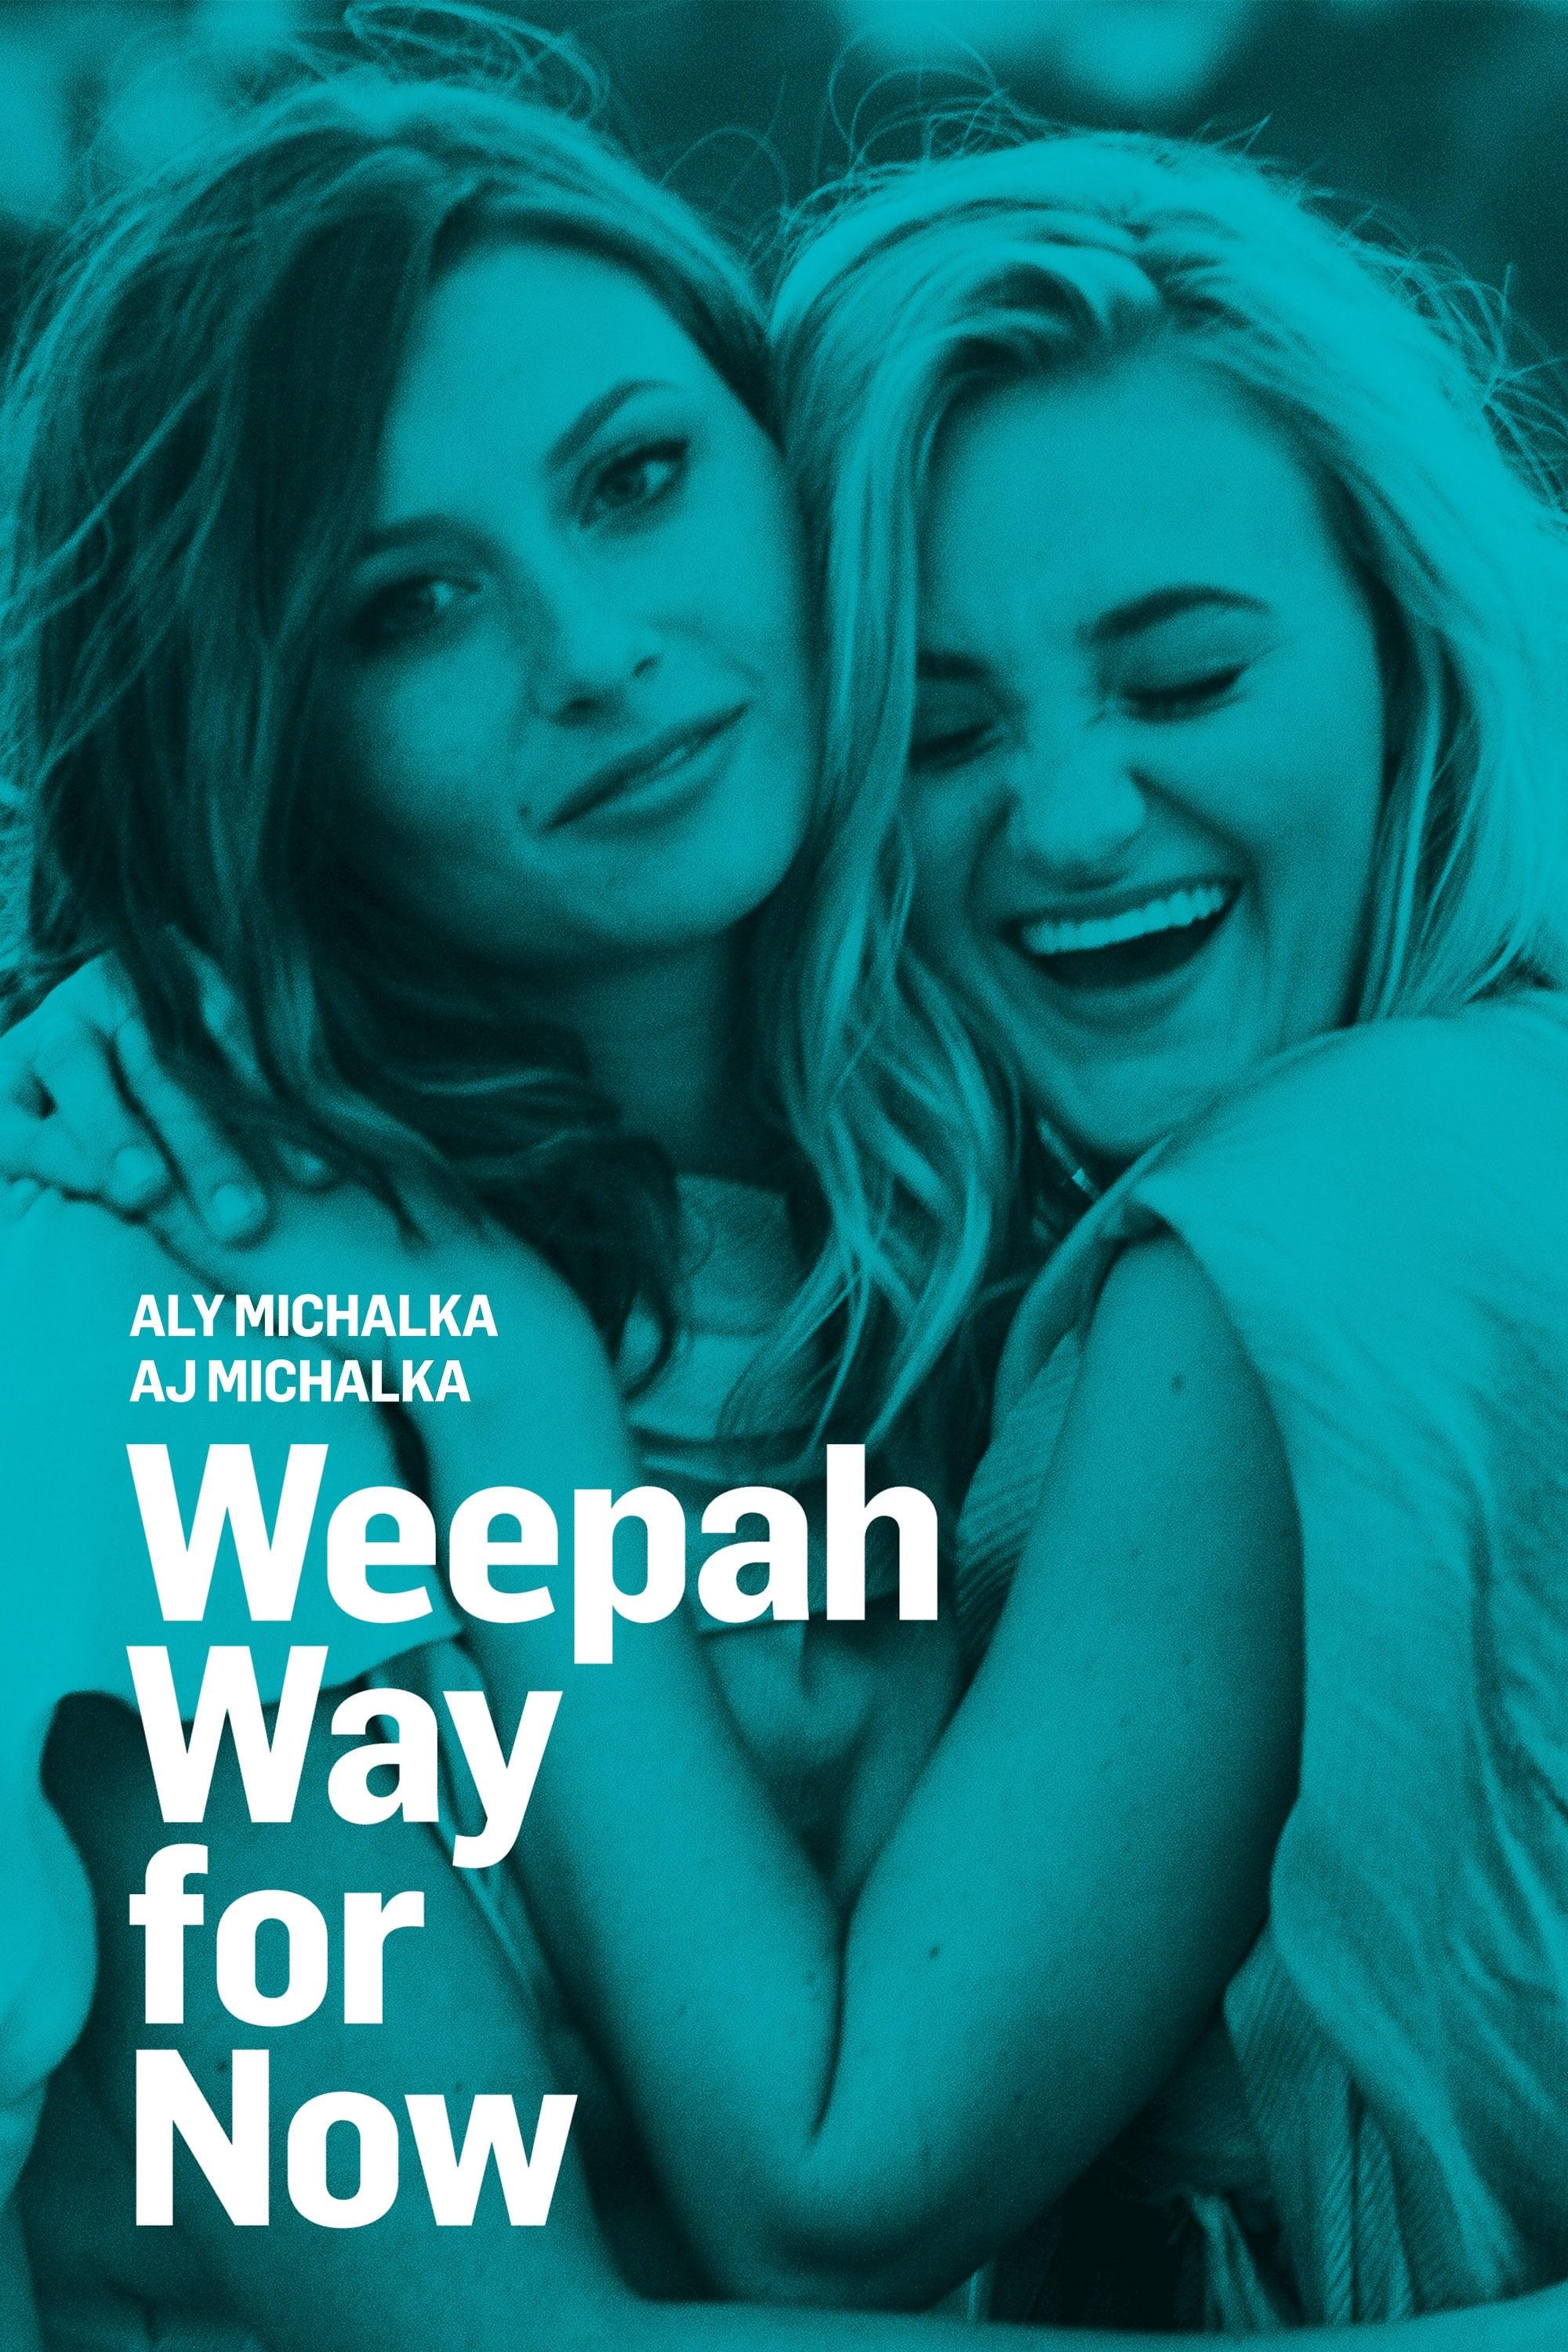 Weepah Way For Now poster